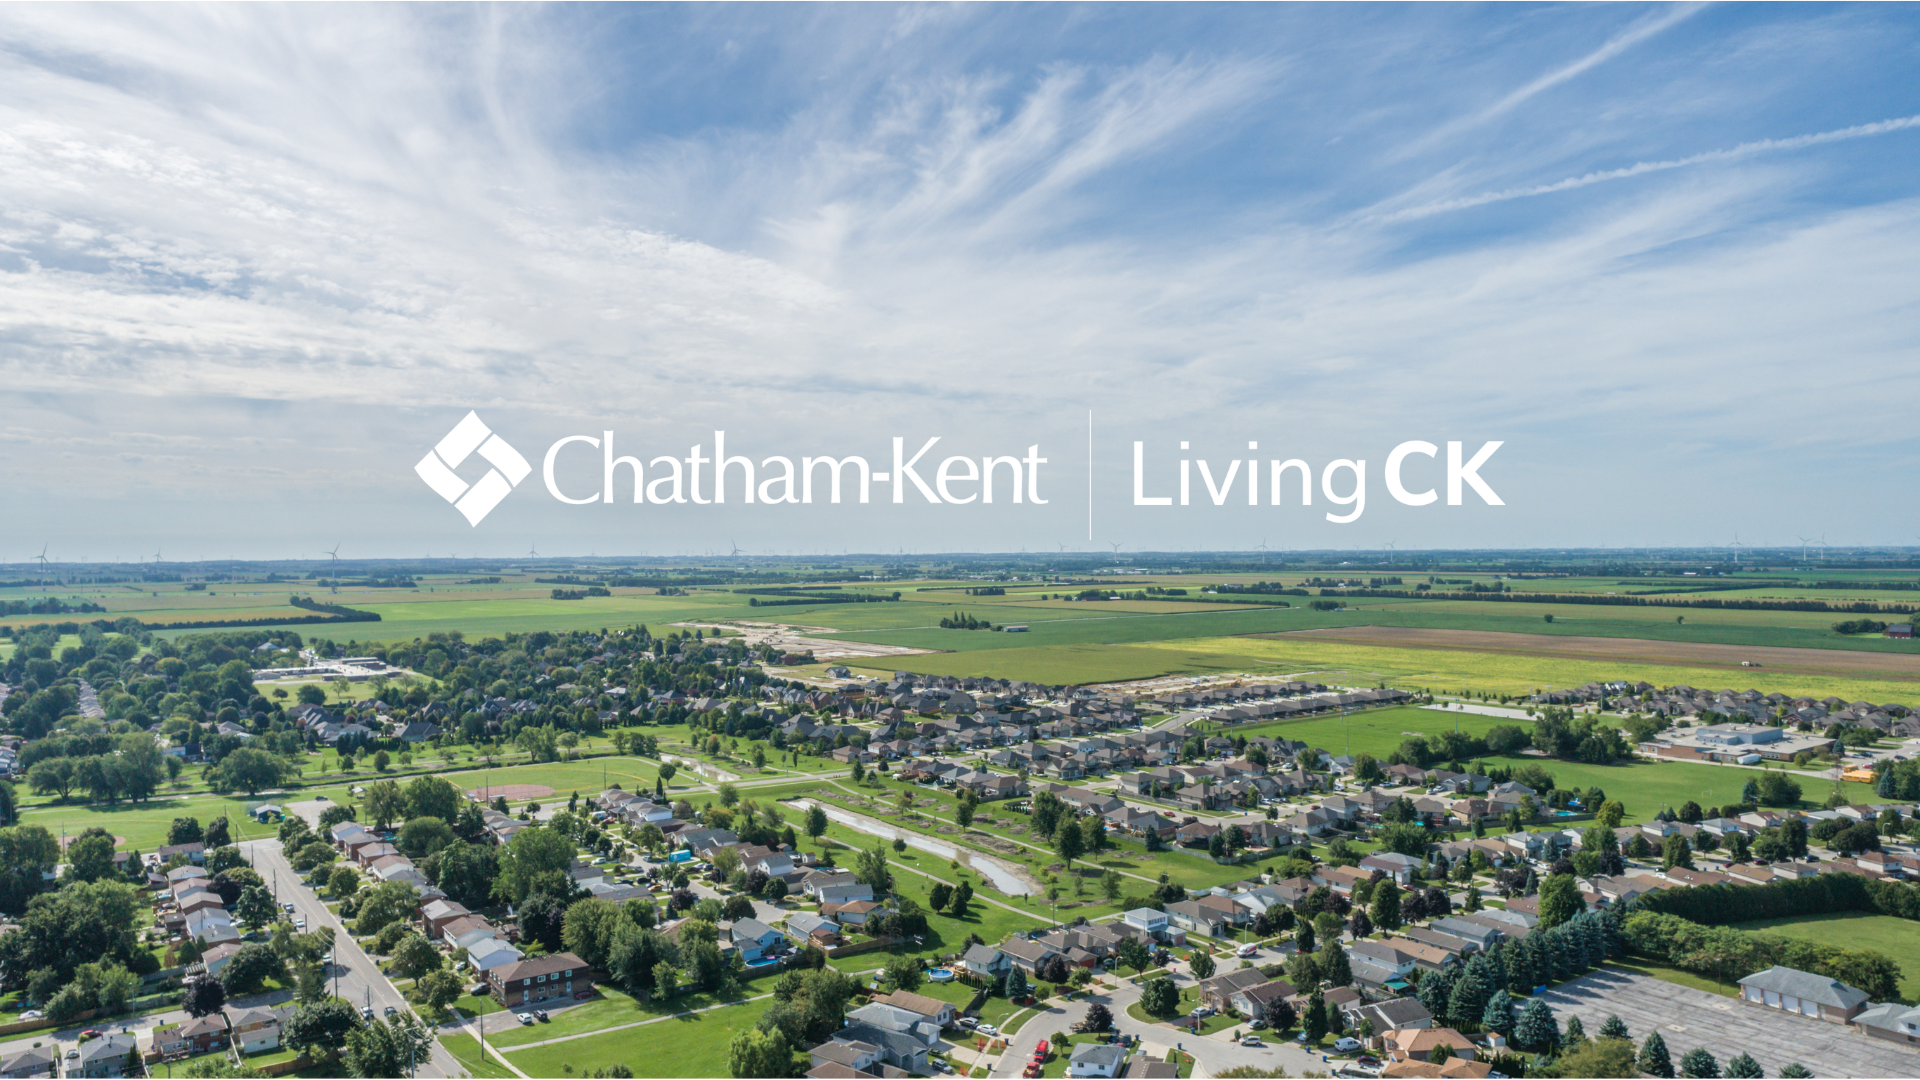 Chatham-Kent drone shot of neighbourhoods with a creek running through the middle and green fields in the background. The Municipality of Chatham-Kent LivingCK logo is overlaid in the center in white.